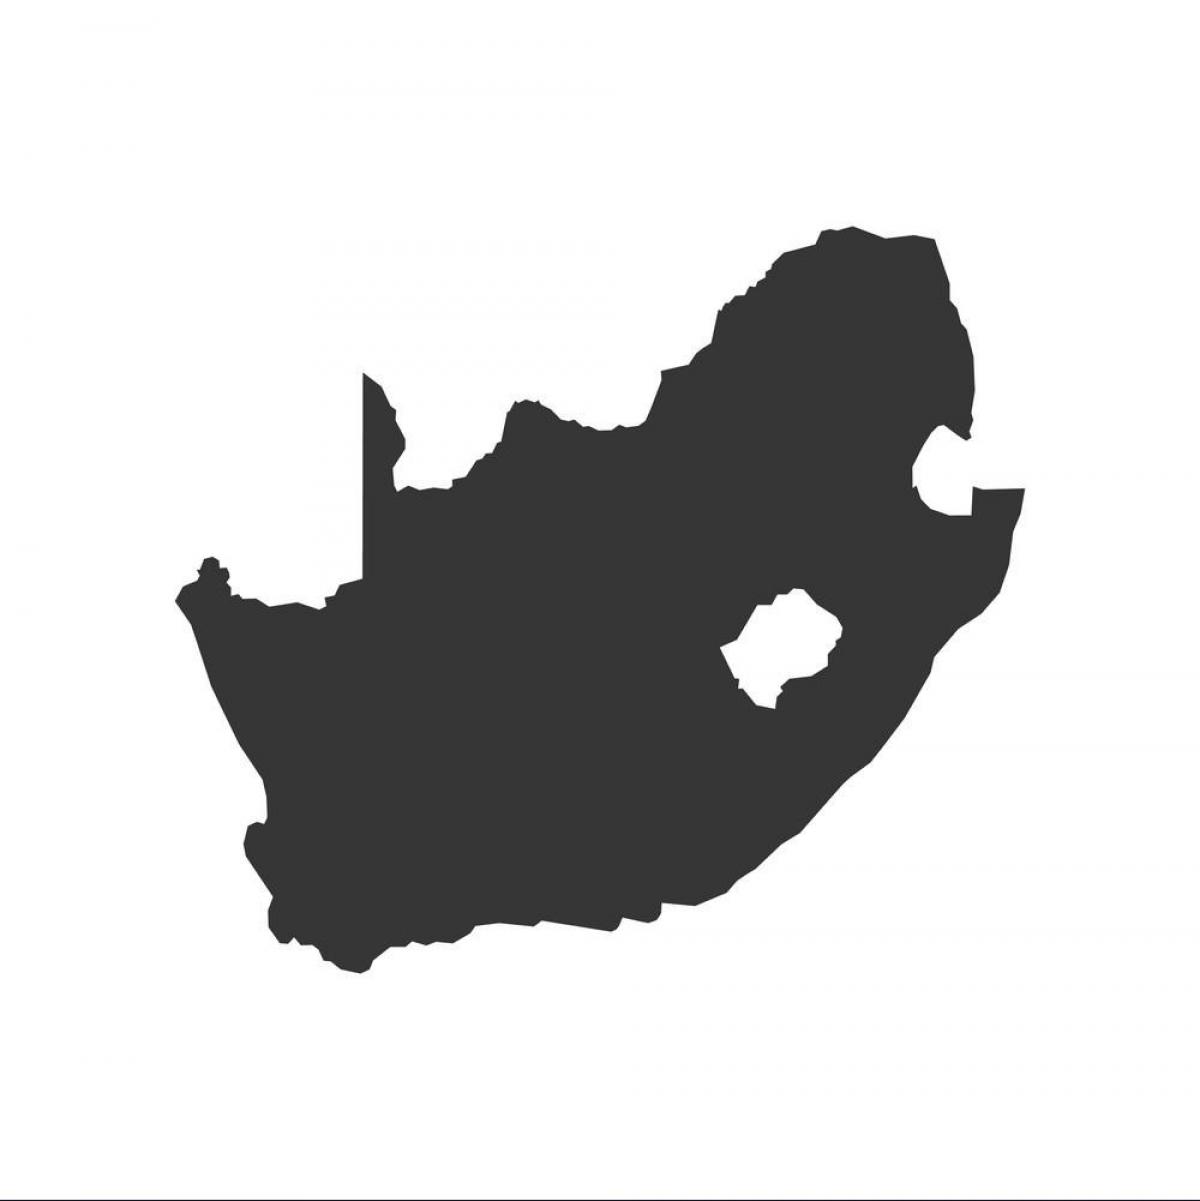 South Africa contours map